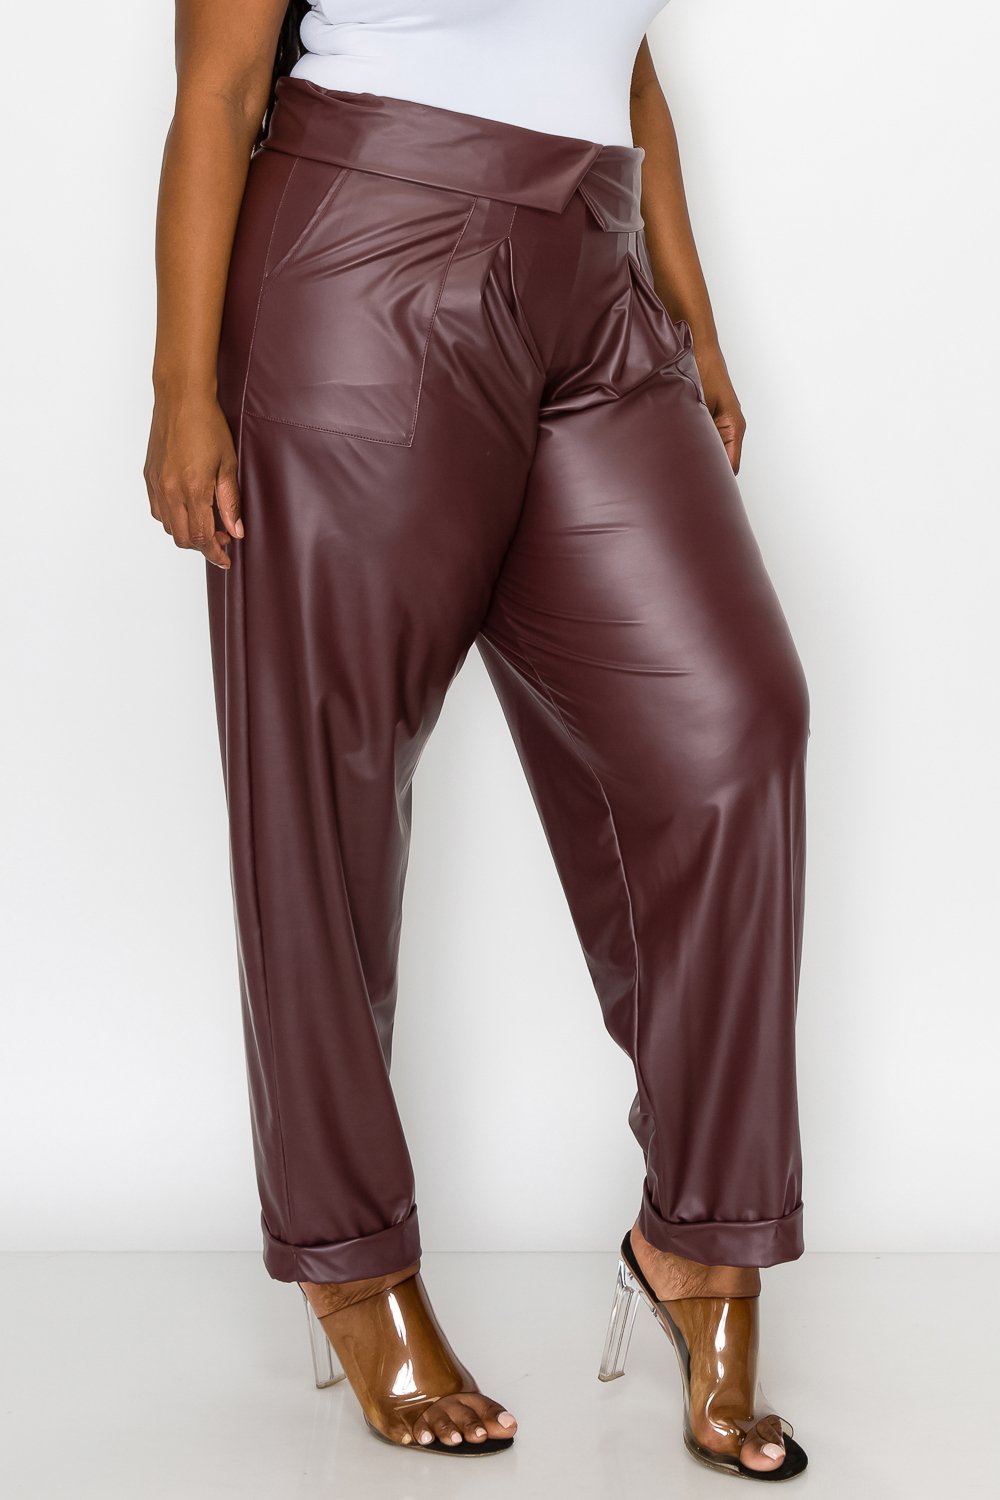 quine-cashmere-chocolate-brown-faux-leather-pant — bows & sequins